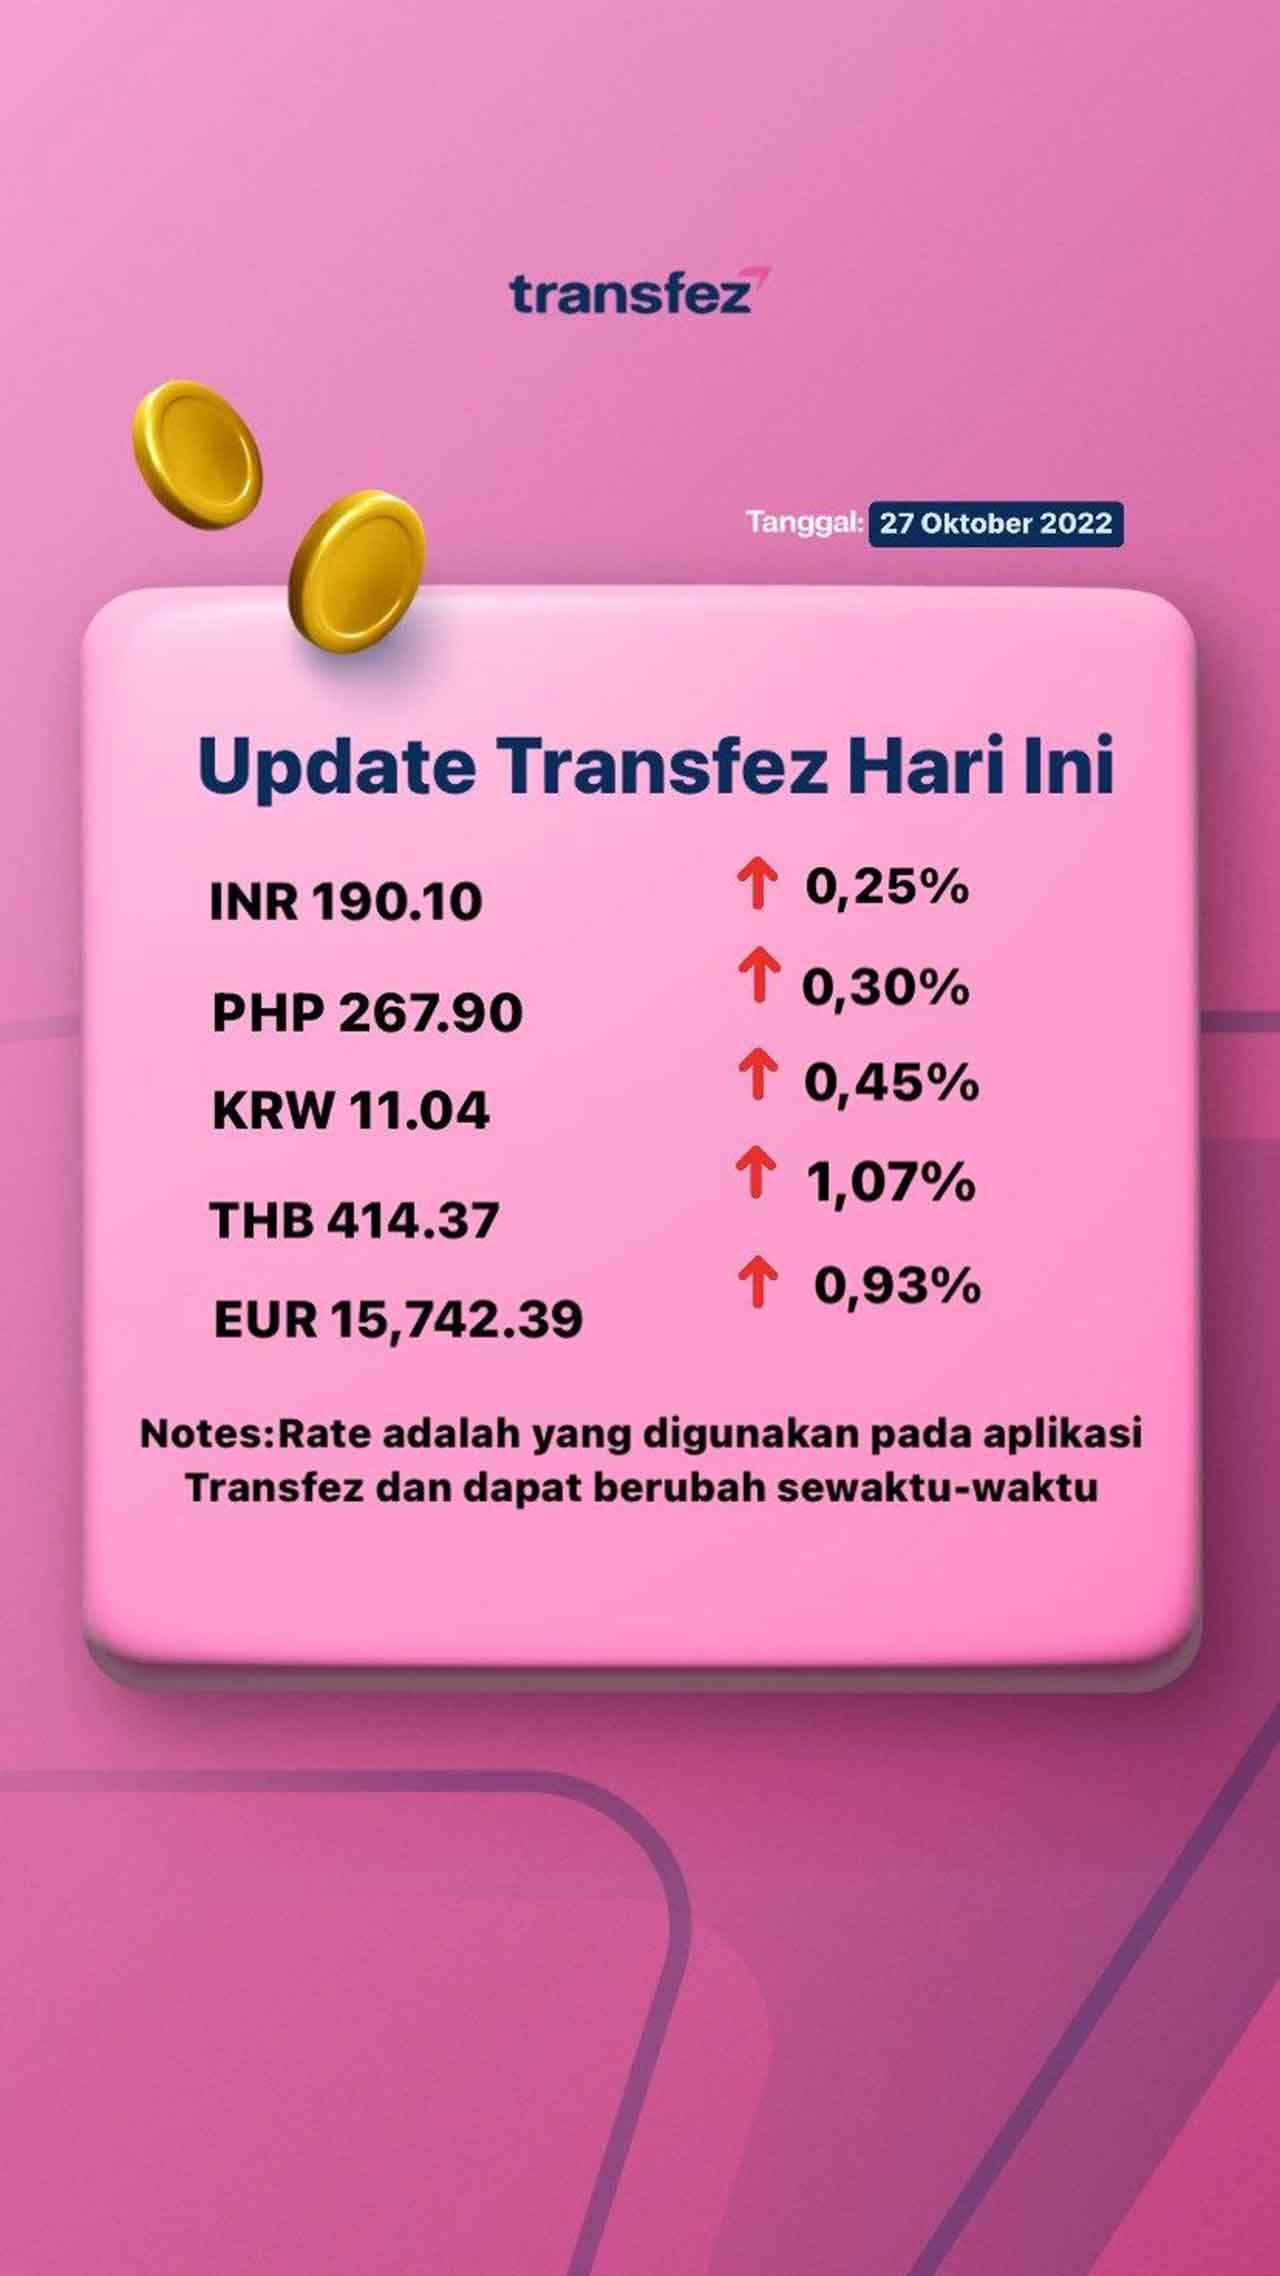 Today's Transfez Rate Update 27 October 2022